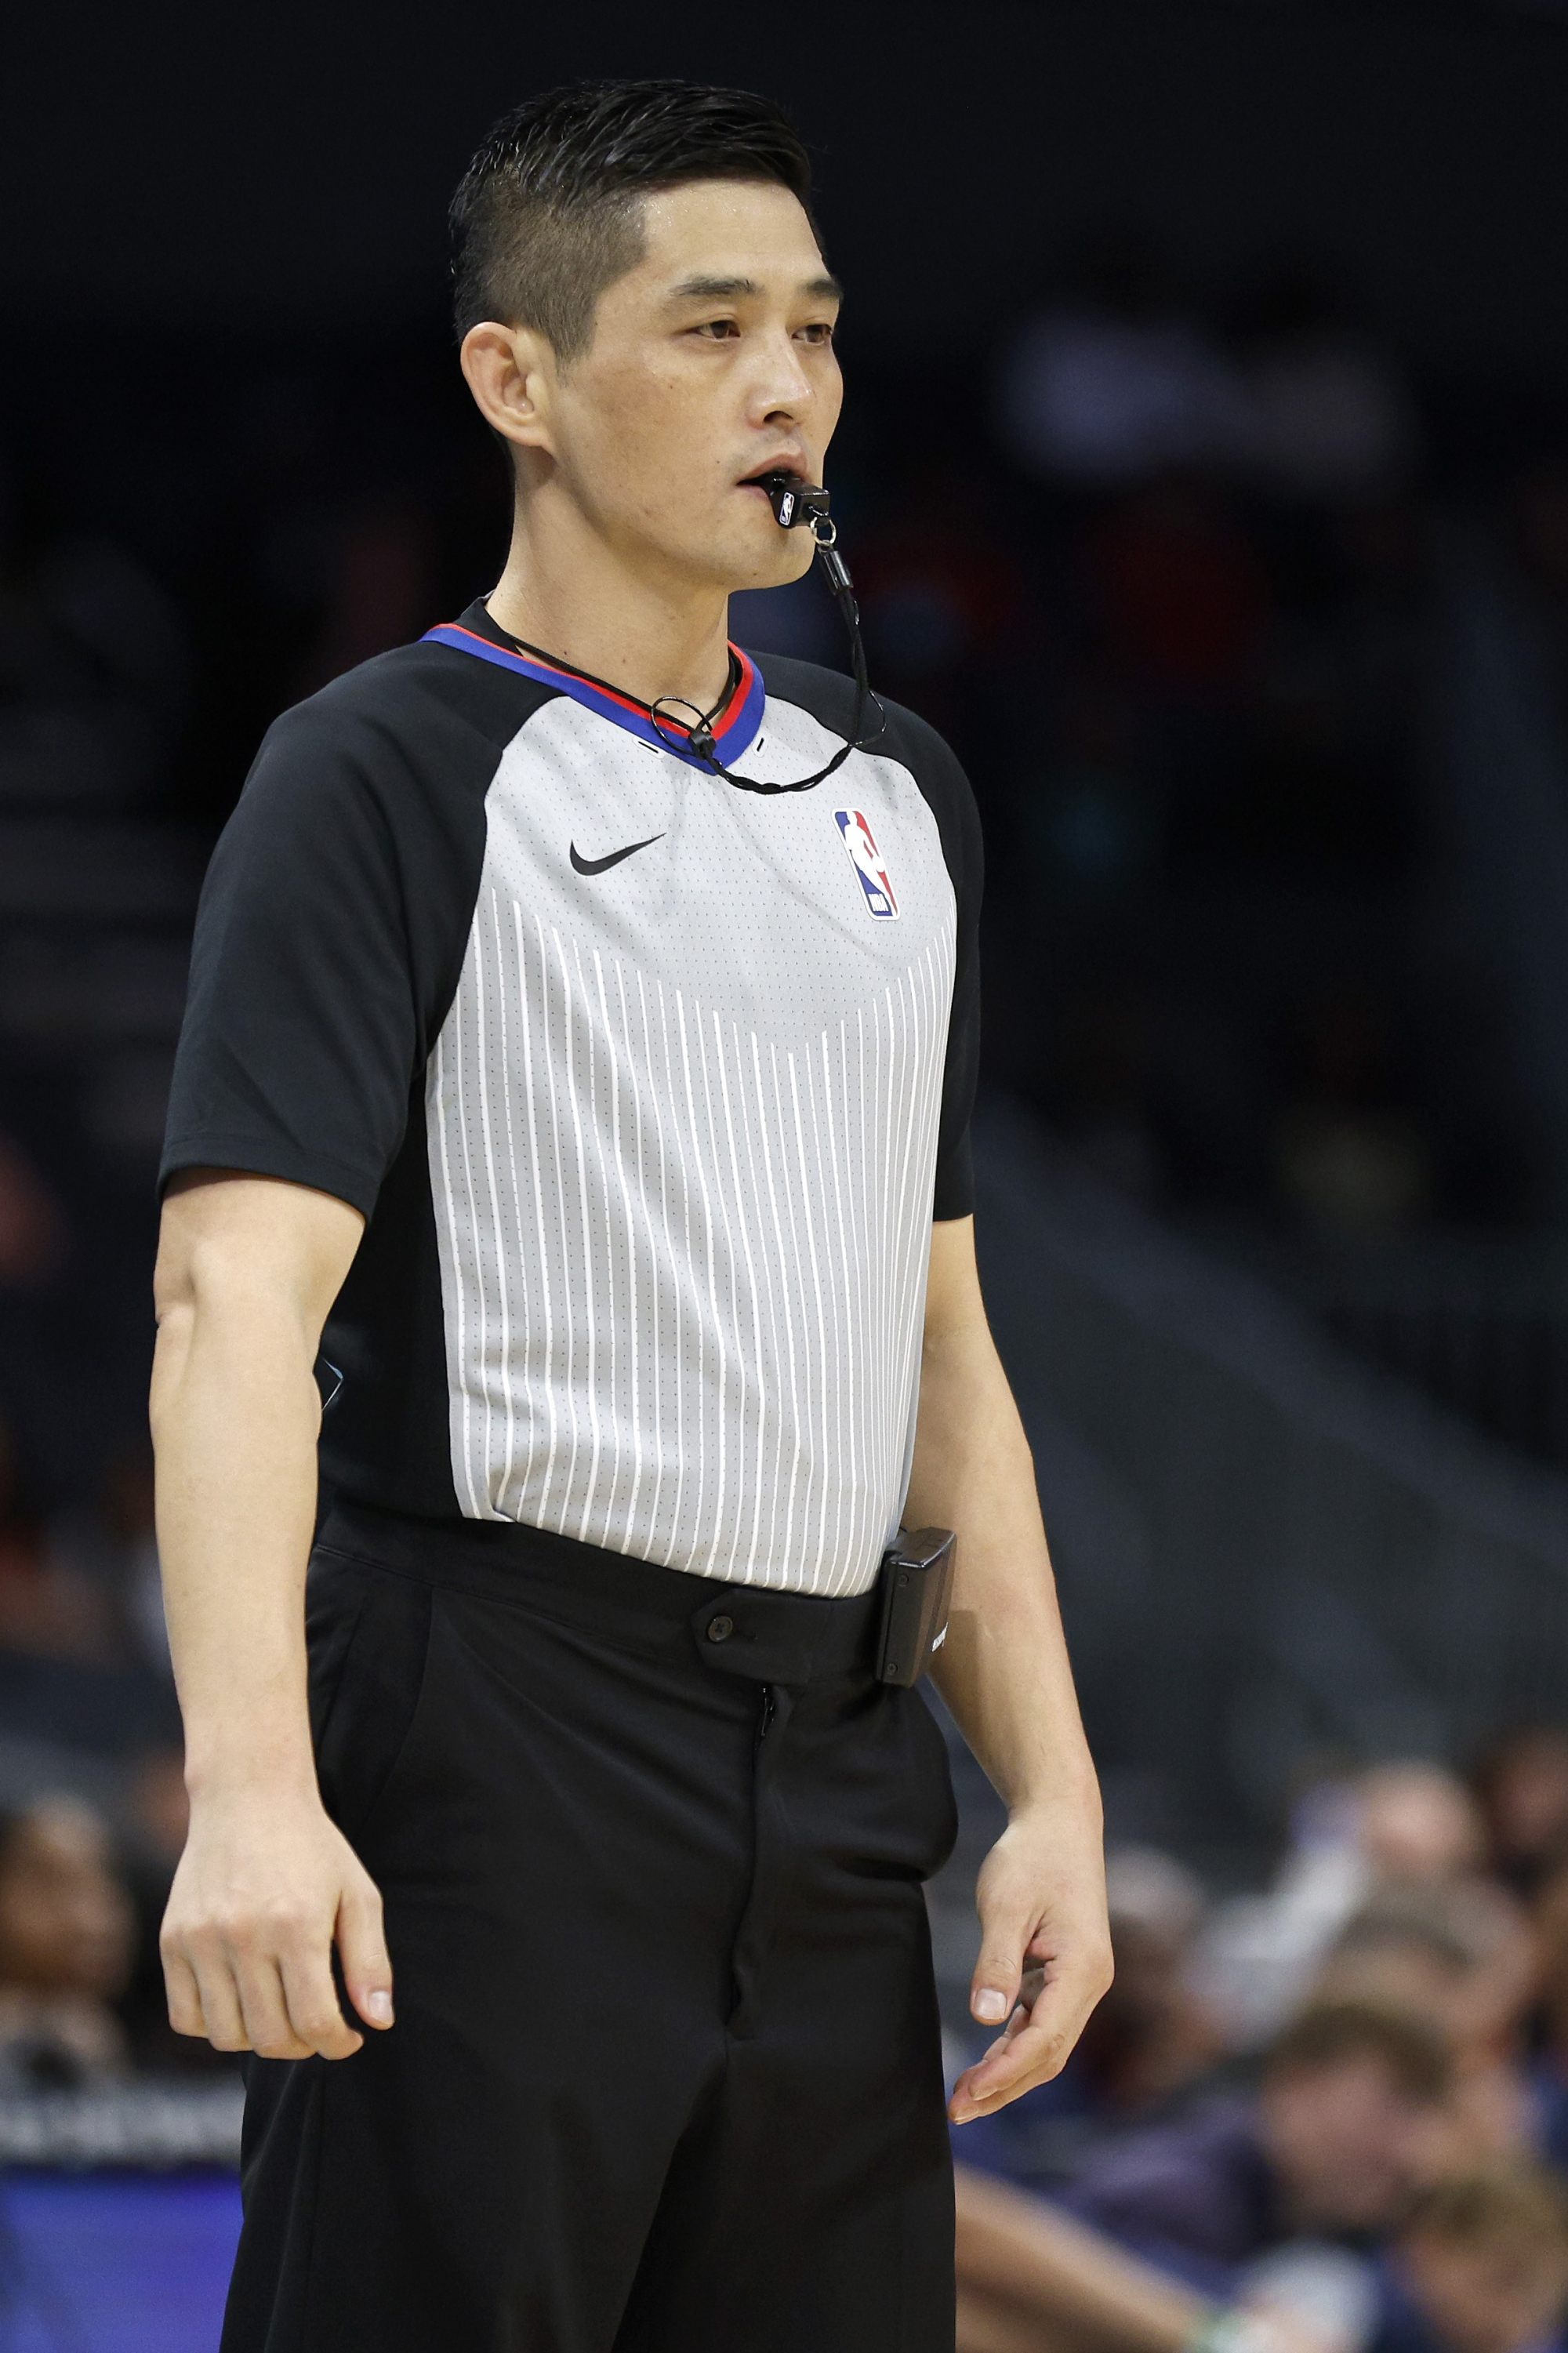 For one referee, path from Korea to the NBA wasn't easy